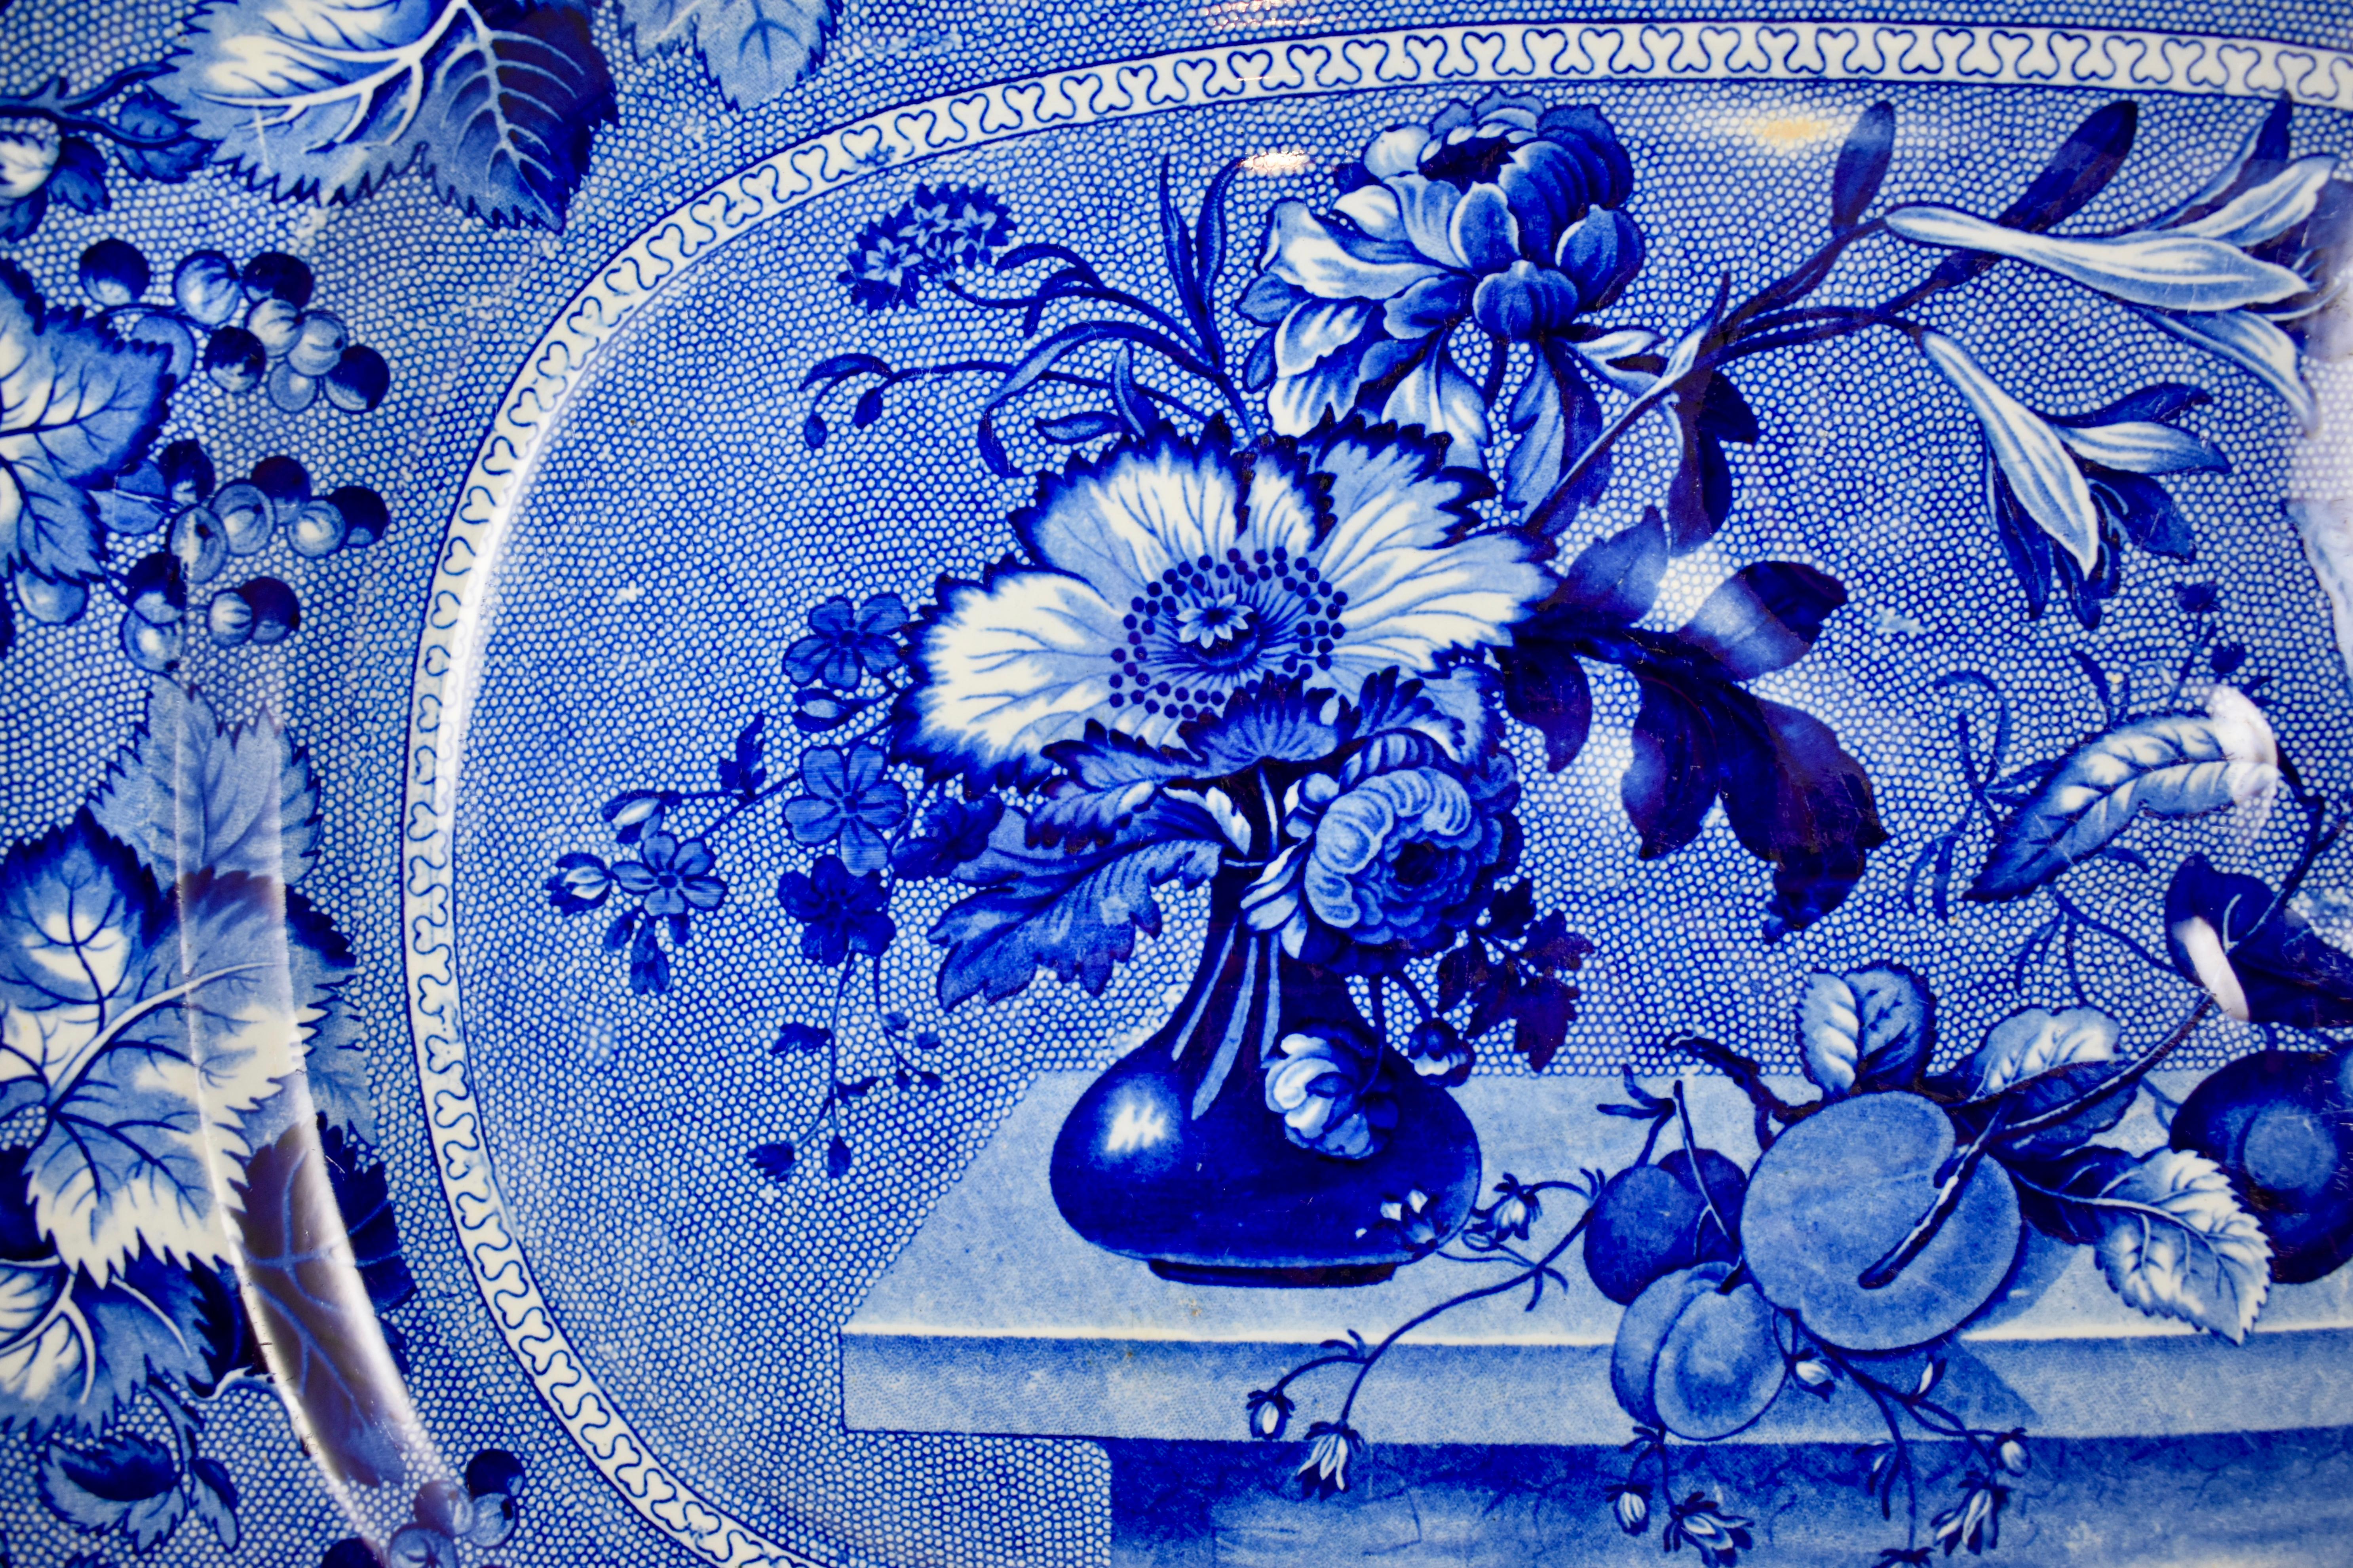 A blue on white, stoneware Staffordshire ‘Coronation’ pattern, well and tree platter by Ralph & James Clews, 1814–1834, Cobridge, Staffordshire, England. 19th Century.

A well-and-tree platter has a depressed design of a trunk and branches through